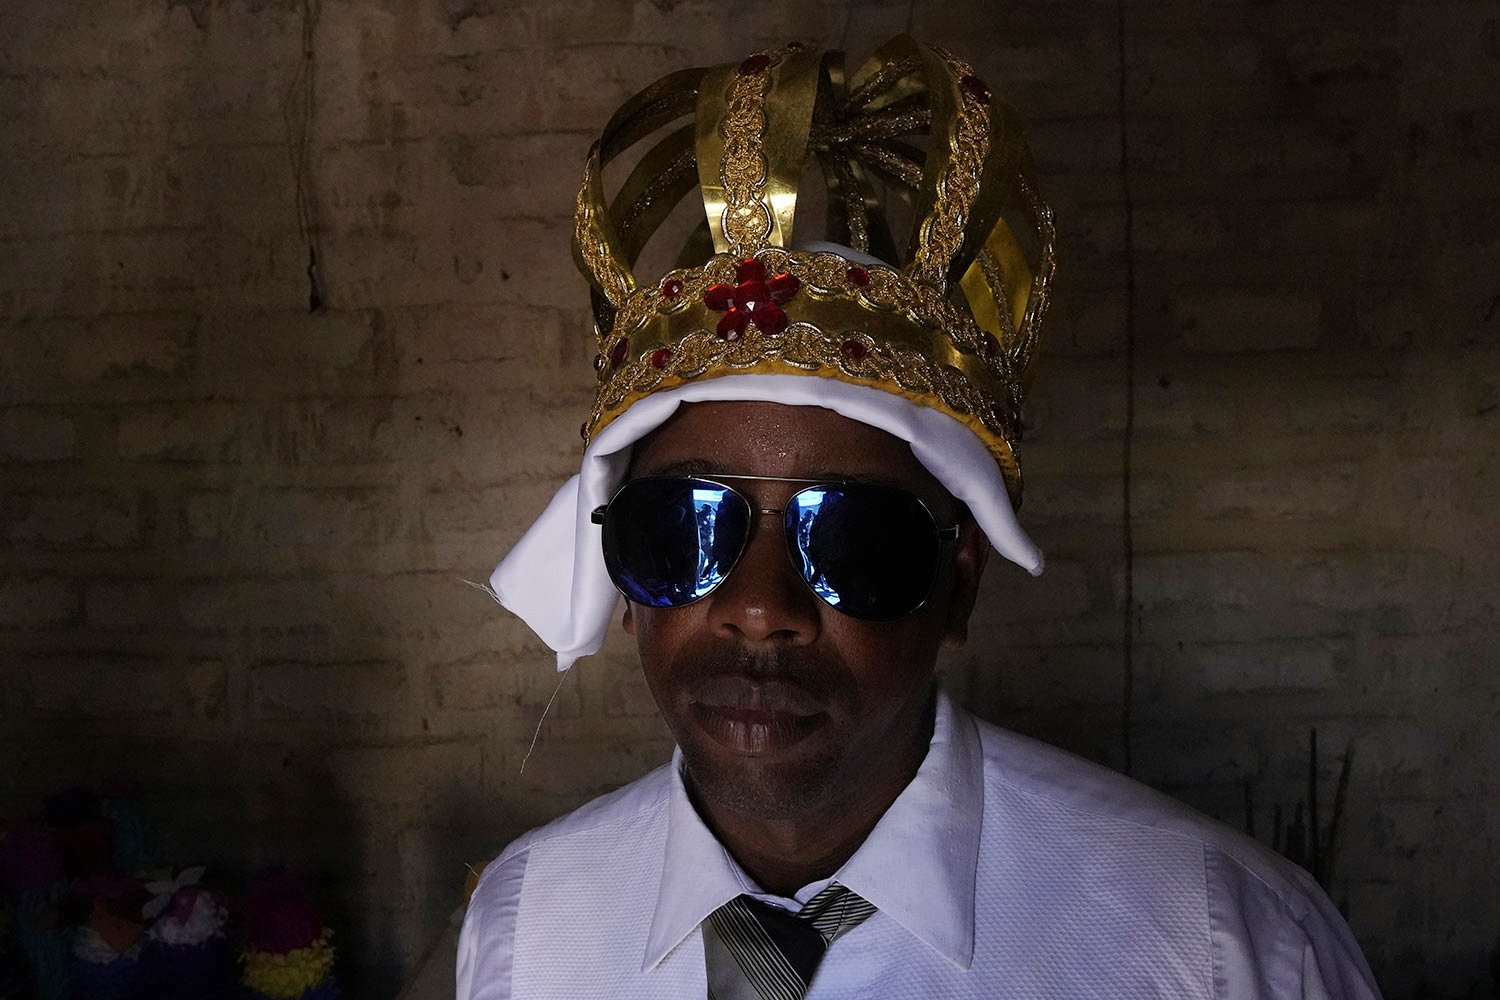  Adonildes da Cunha poses for a photo in the emperor's crown at the end of a week-long pilgrimage honoring the patron saint in Cavalcante, Goias state, Brazil, Aug. 15, 2022. (AP Photo/Eraldo Peres) 